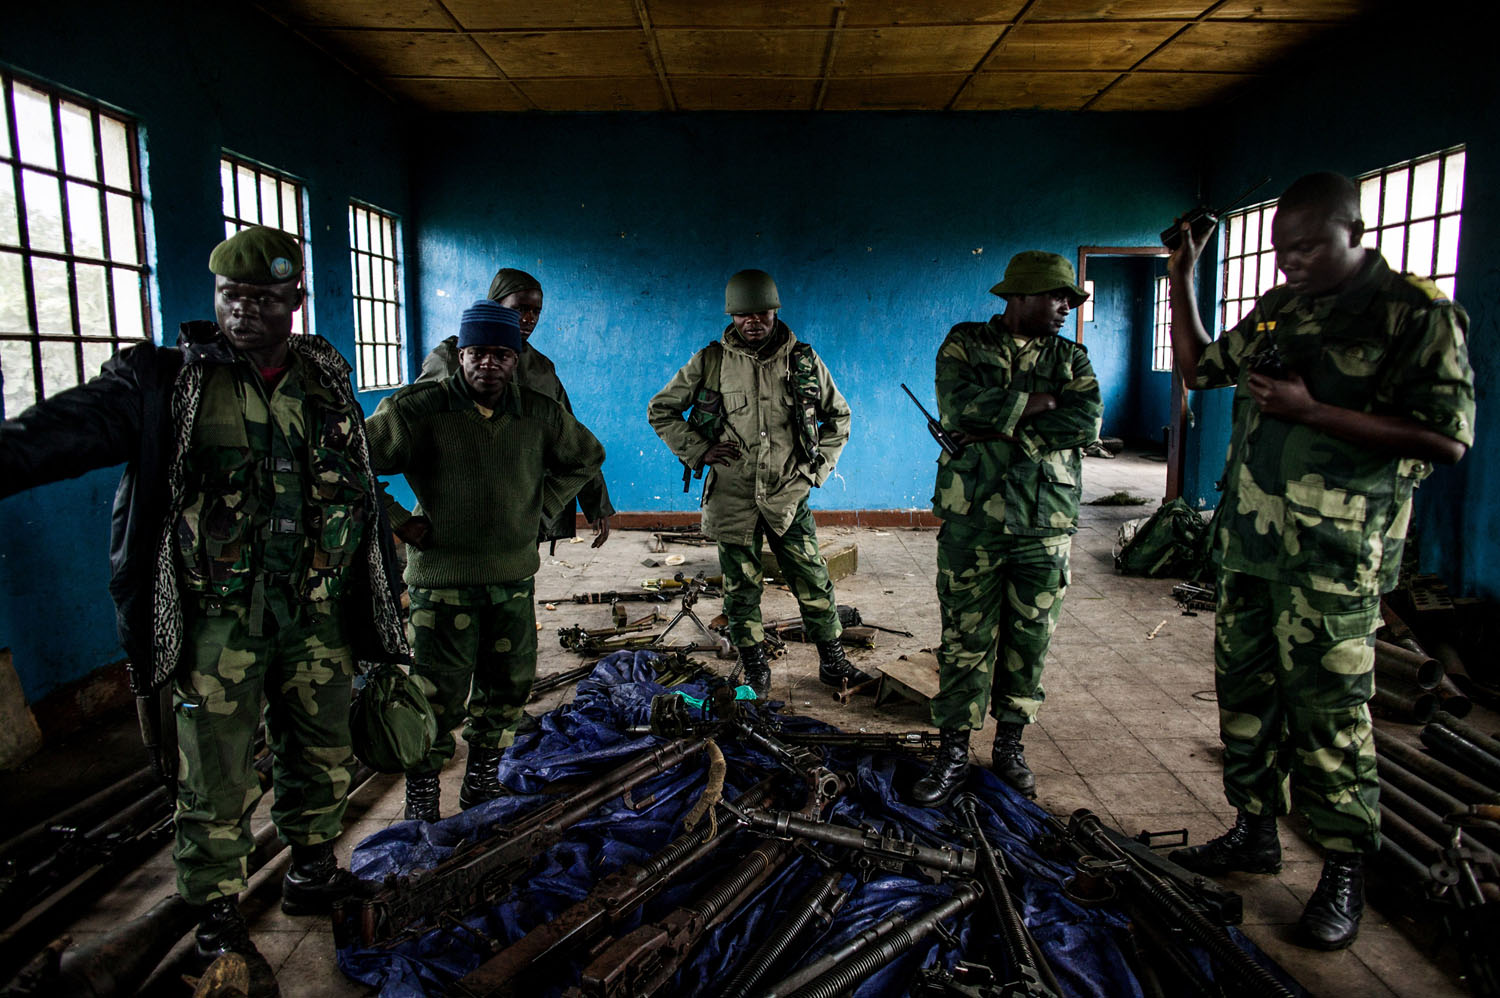  Congolese soldiers inspect munitions abandoned by M23 rebels at a former M-23 military base in Rumangabo, north of Goma. 